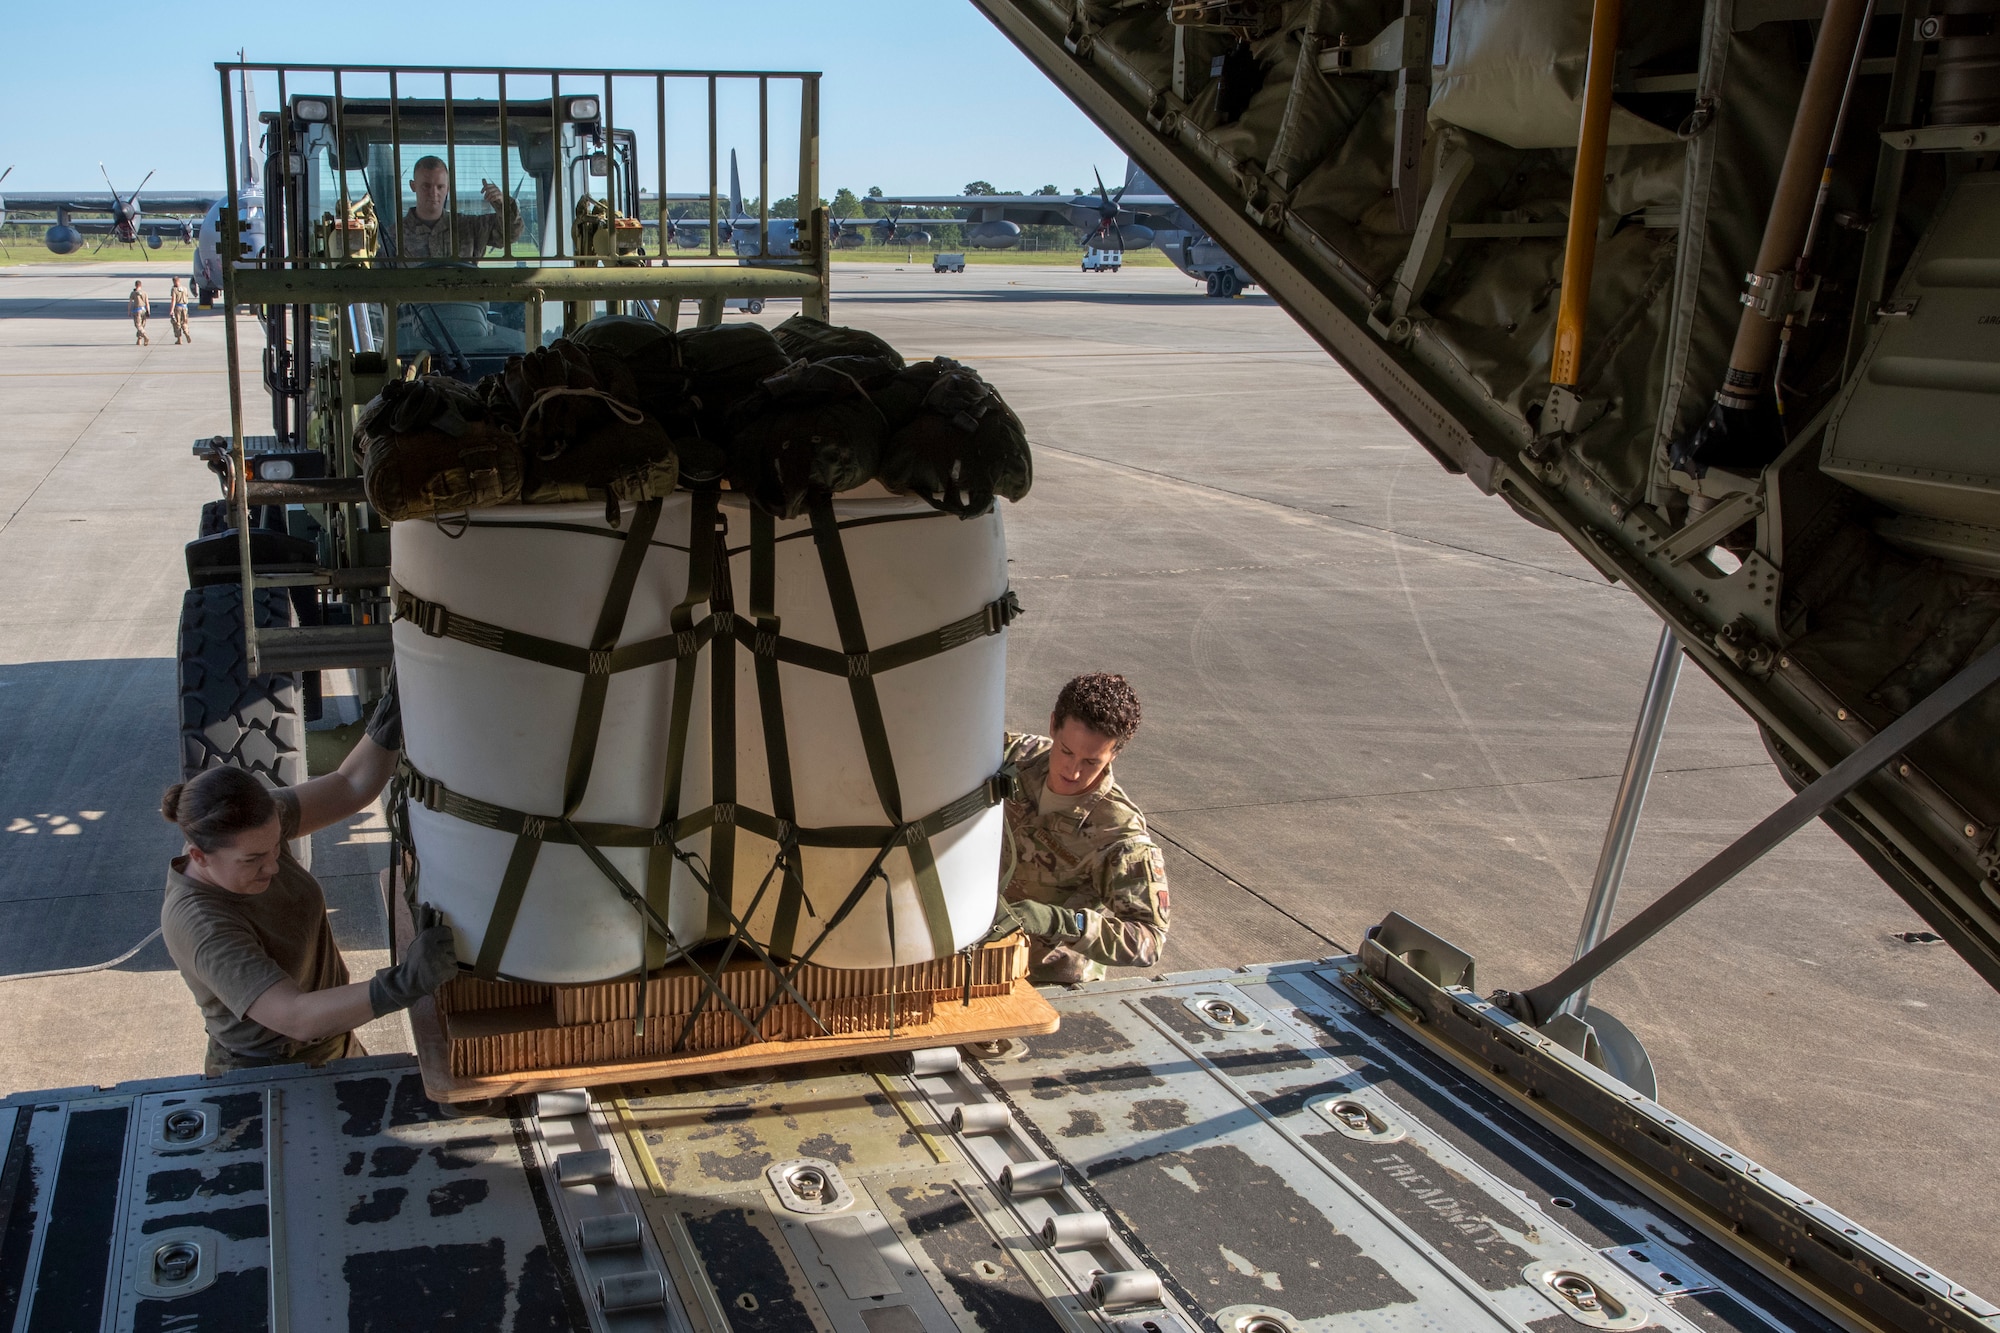 Senior Airman Rachel Bissonnette, left, and Tech. Sgt. Colleen McGahuey-Ramsey, right, both 71st Rescue Squadron (RQS) loadmasters, move a container delivery system on to the ramp of a HC-130J Combat King II before the airframe’s first flight to be operated by an all-female aircrew Sept. 6, 2019, at Moody Air Force Base, Ga. The 71st RQS provides rapidly deployable, expeditionary personnel recovery forces for contingency and crisis response operations worldwide. (U.S. Air Force photo by 2nd Lt. Kaylin P. Hankerson)